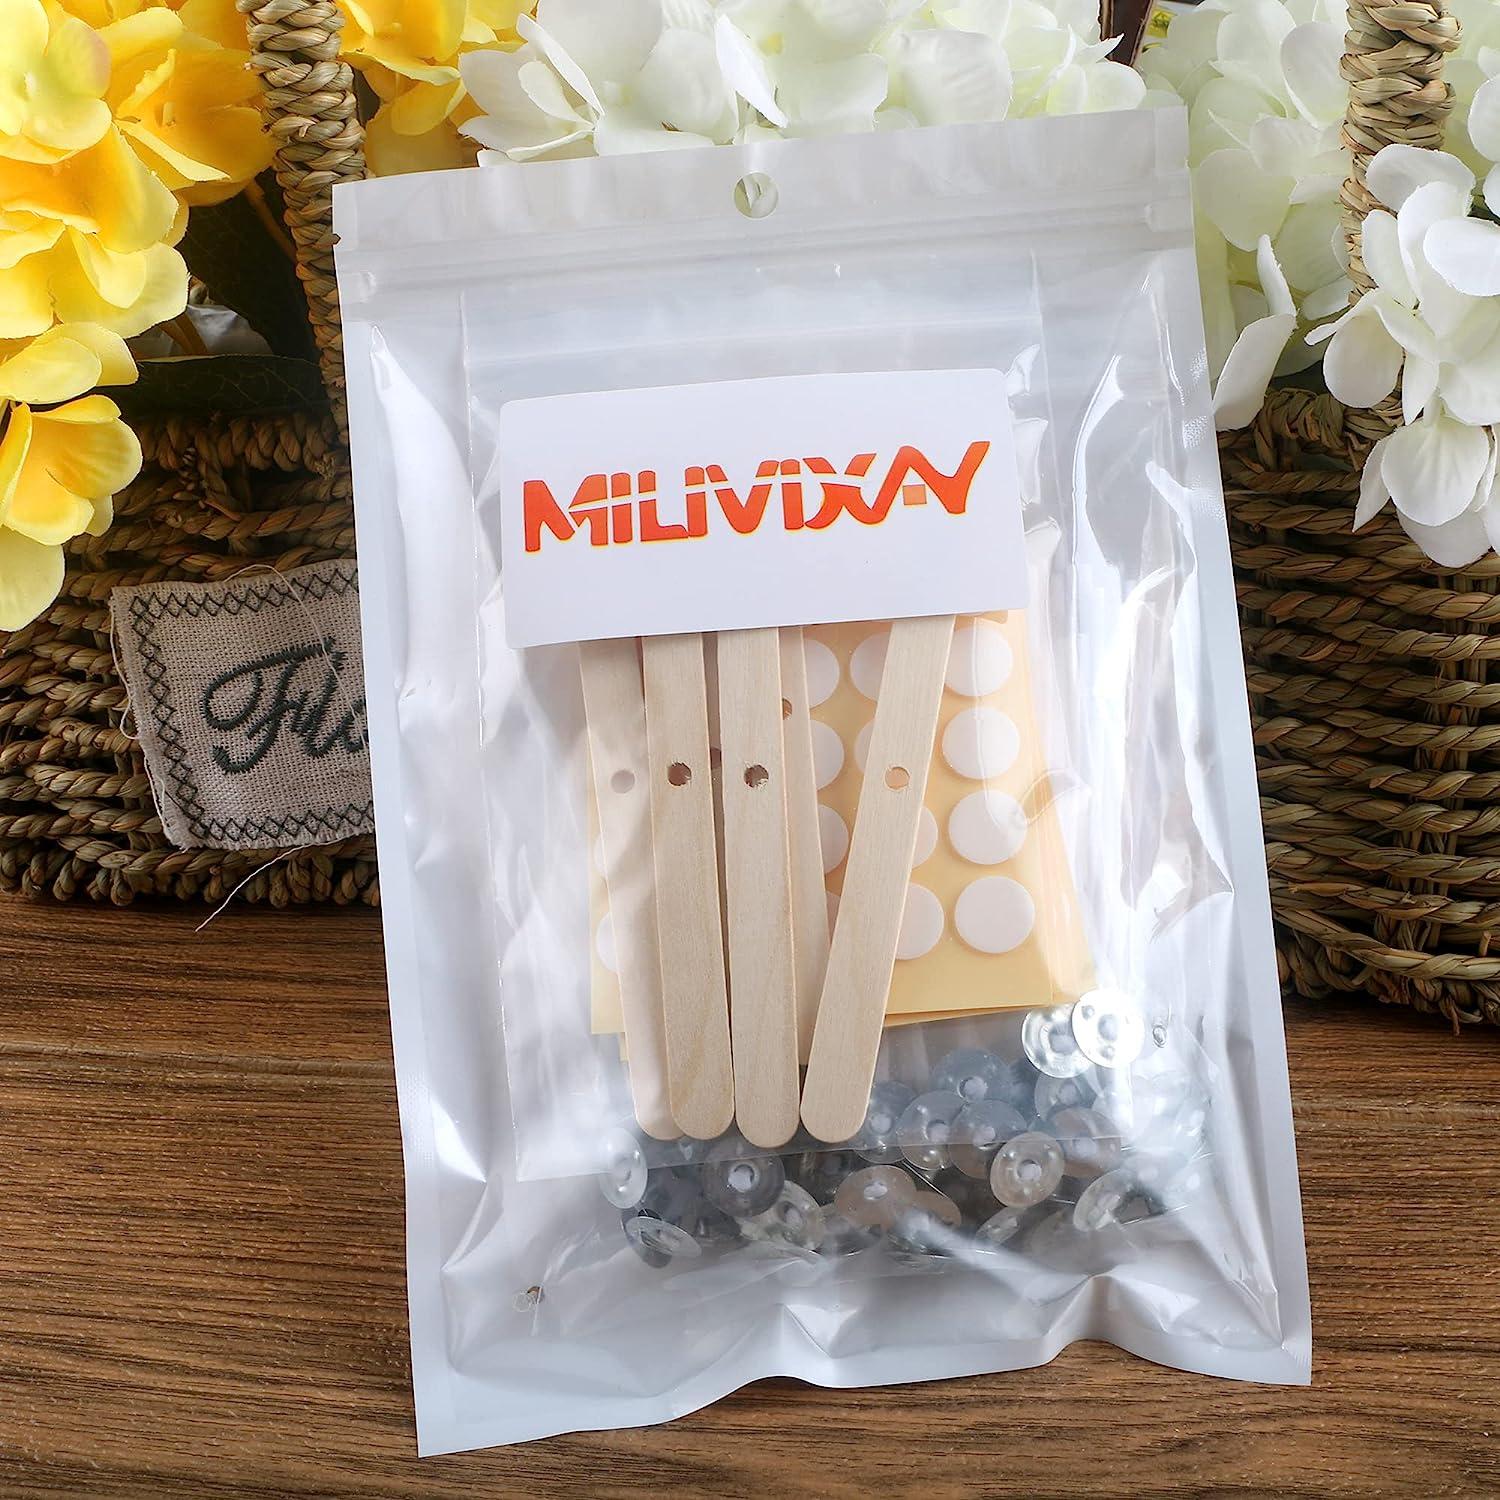 MILIVIXAY 606 Pieces Candle Making Supplies,300 Pieces Cotton Wicks, 300  Pieces Candle Wick Stickers and 6PCS Wooden Candle Wick Holders - Wicks